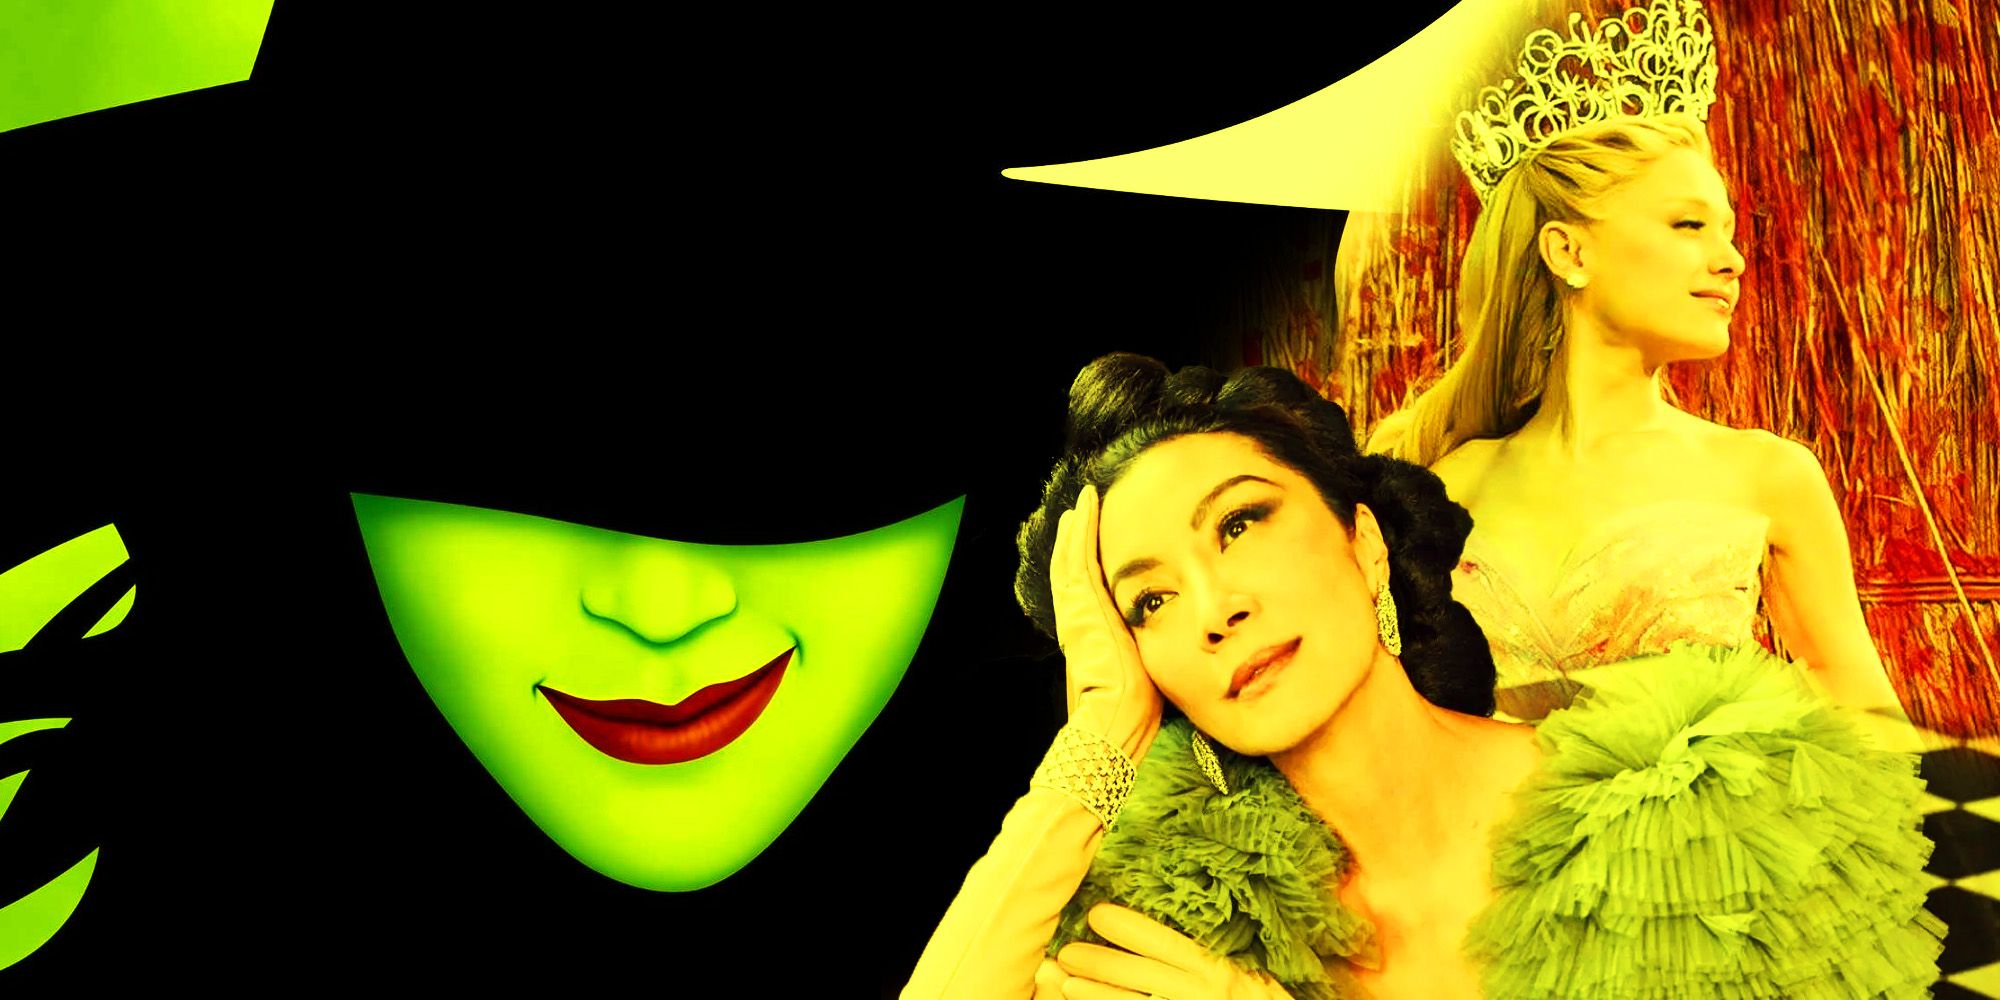 Wicked Witch of the Witch iconography collaged with Michelle Yeoh and Ariana Grande in Wicked